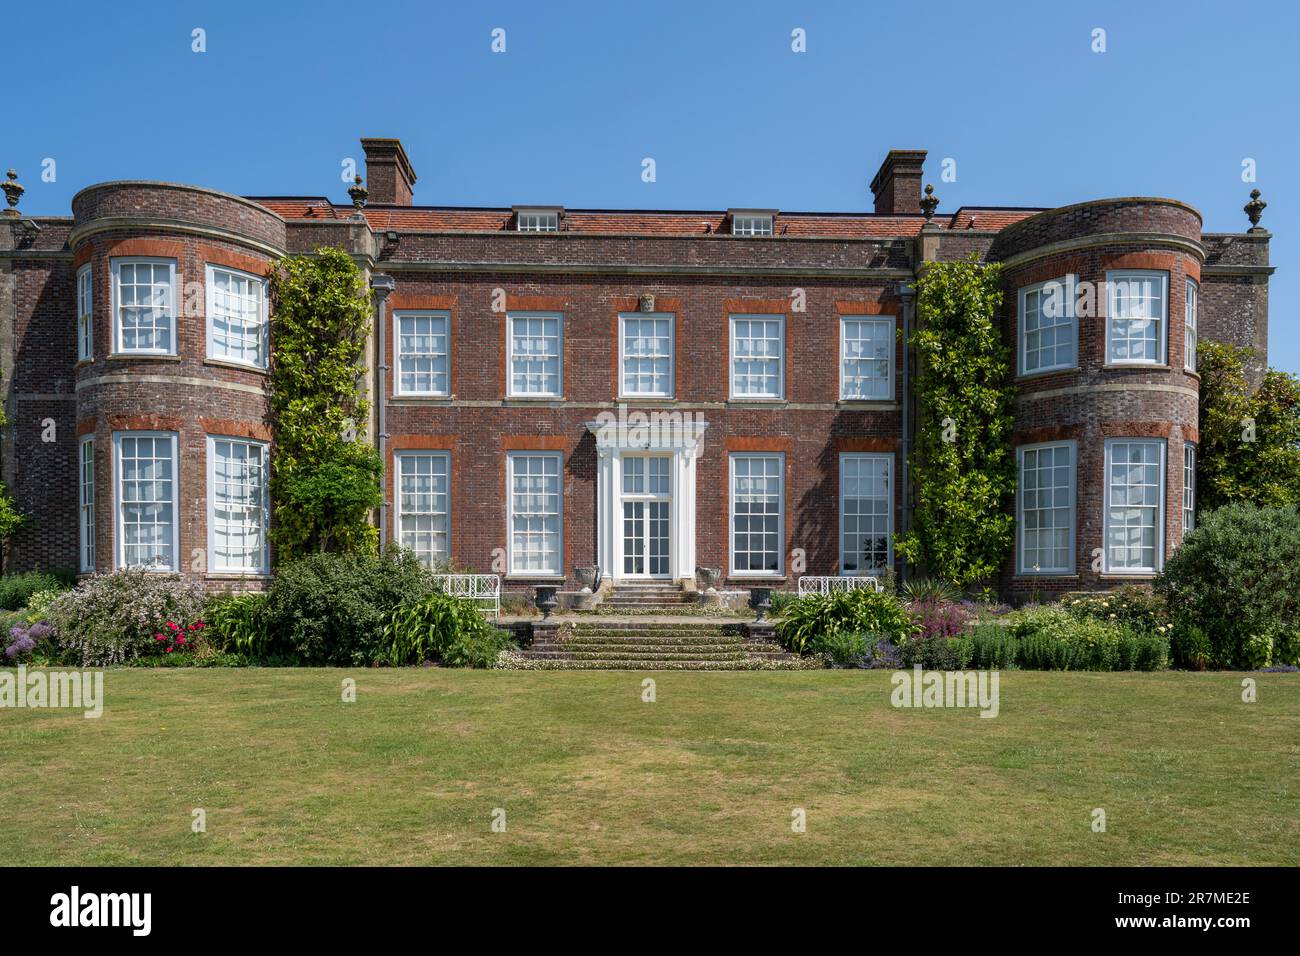 Hinton Ampner  - grade II listed building - Country House, Hinton Ampner, Hampshire, England, UK - a National Trust property. Stock Photo